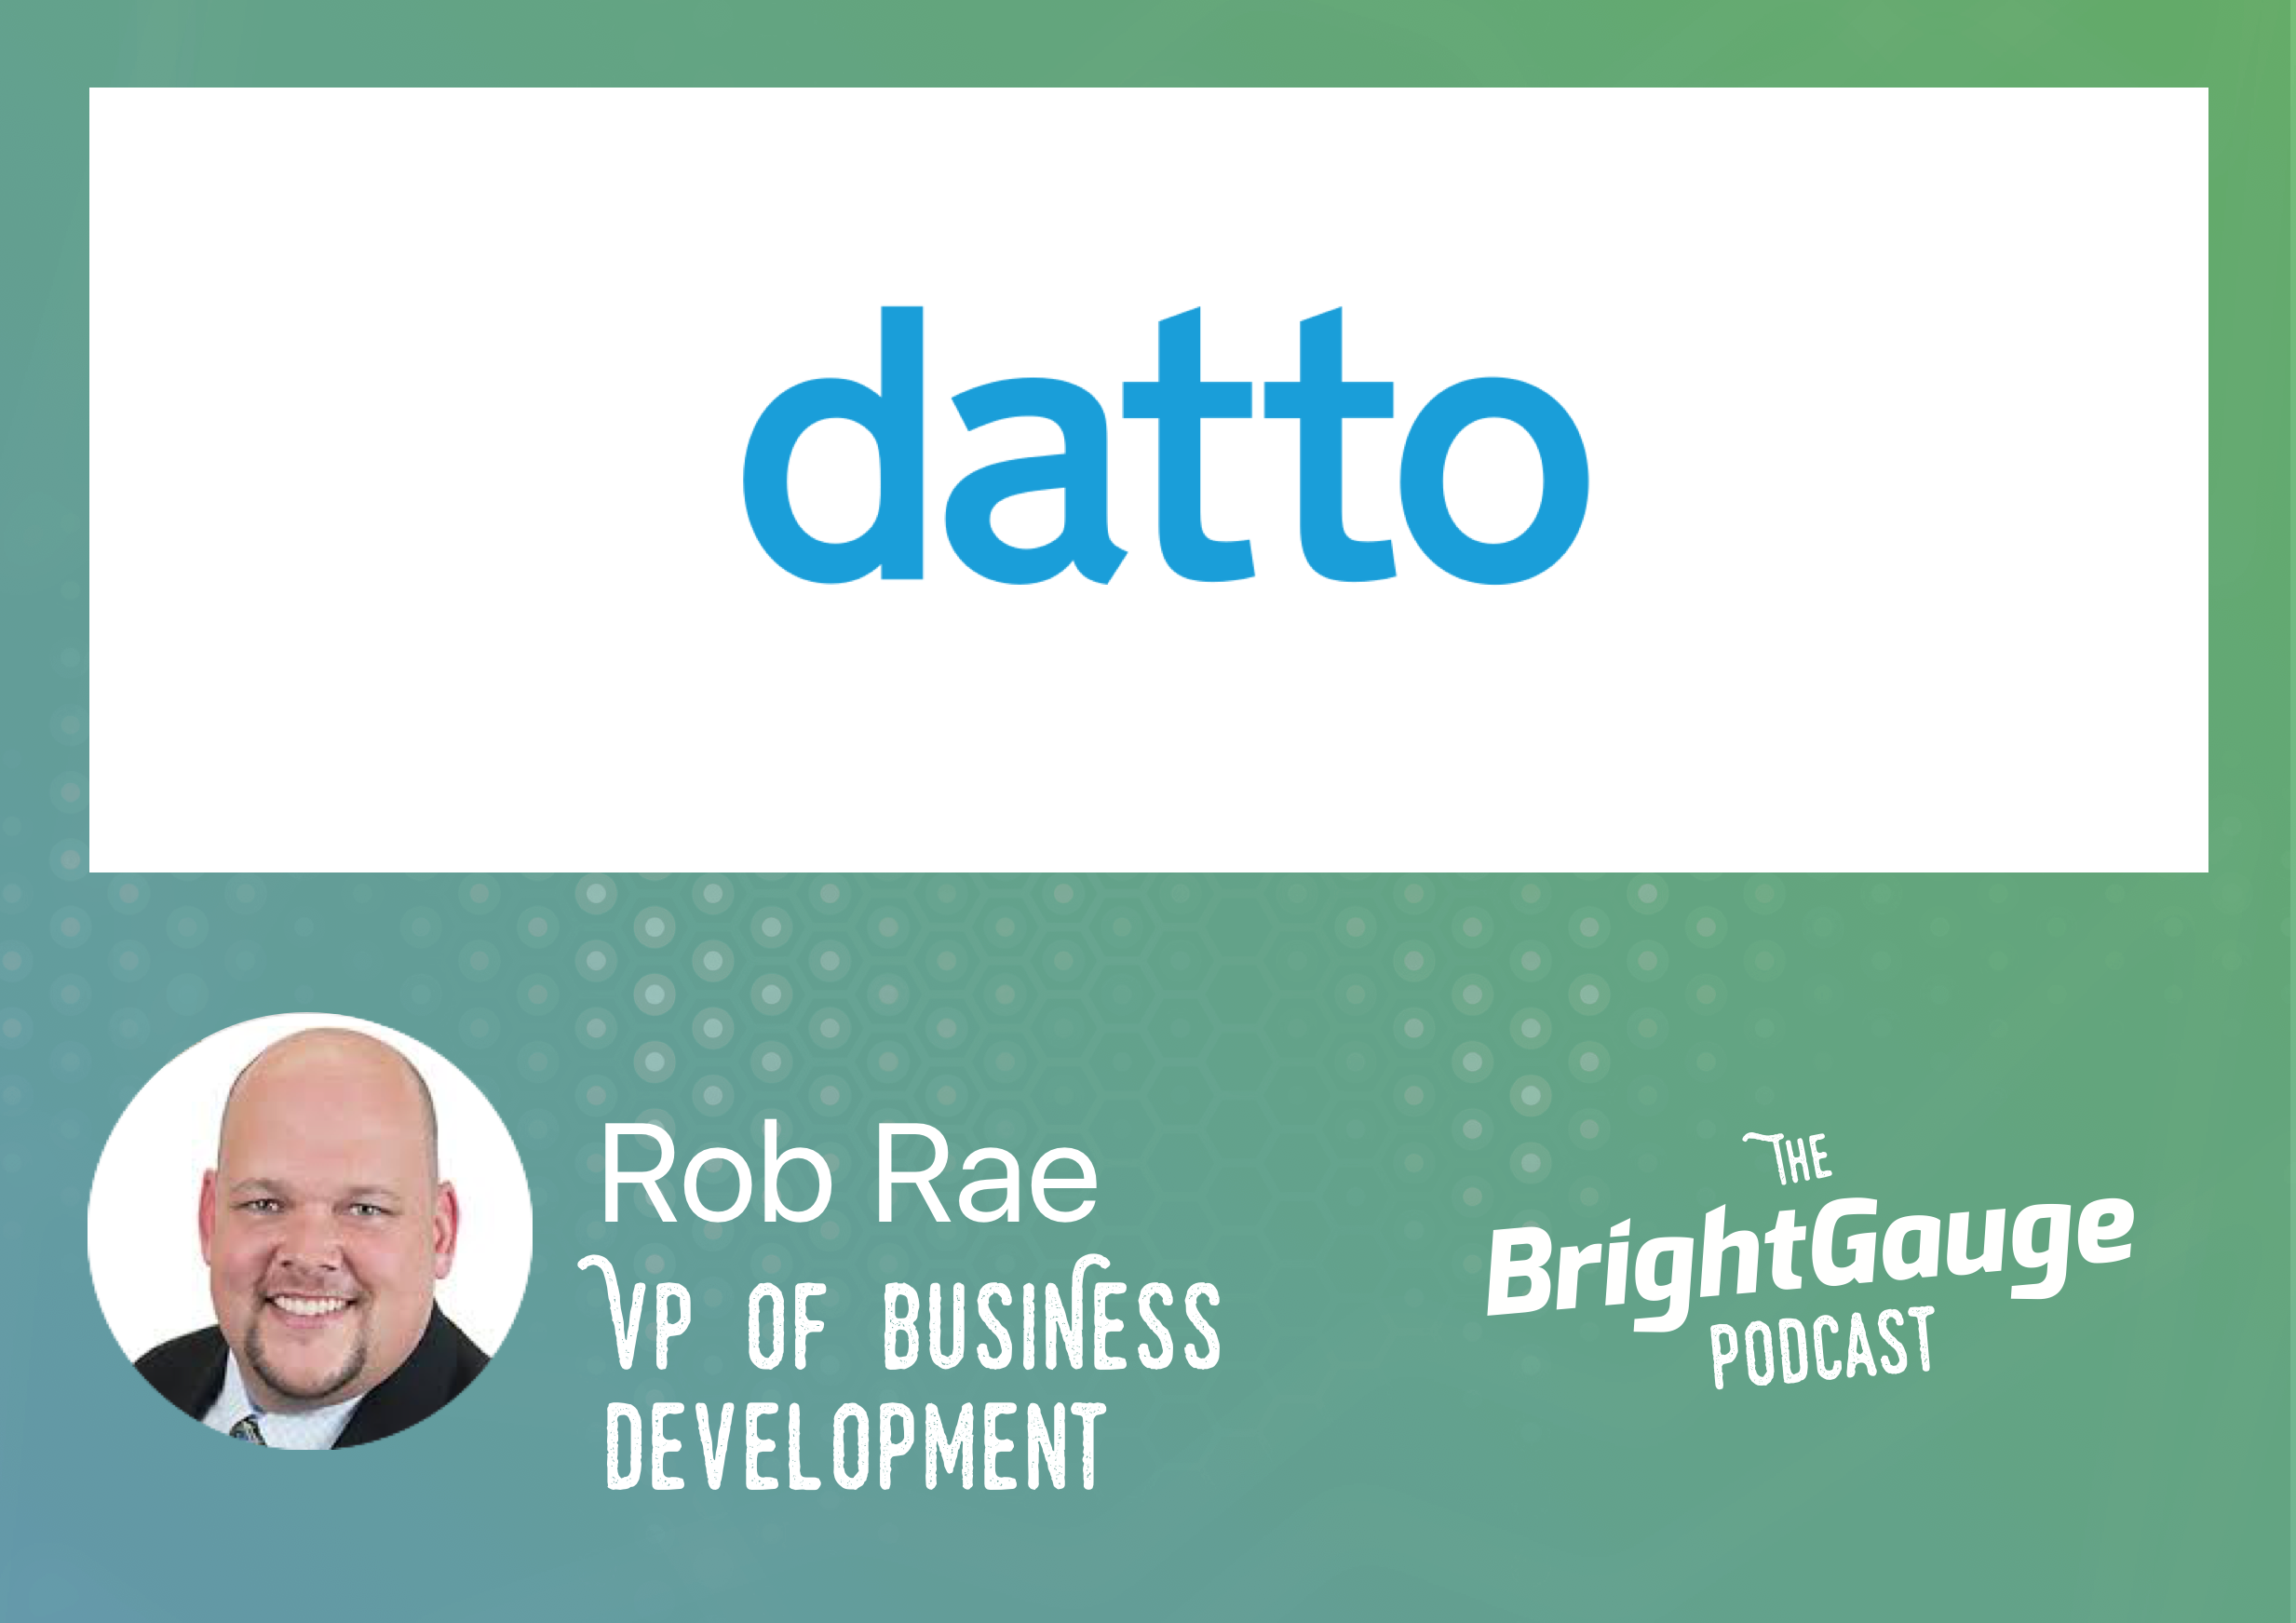 [Podcast] Episode 31 with Rob Rae of Datto